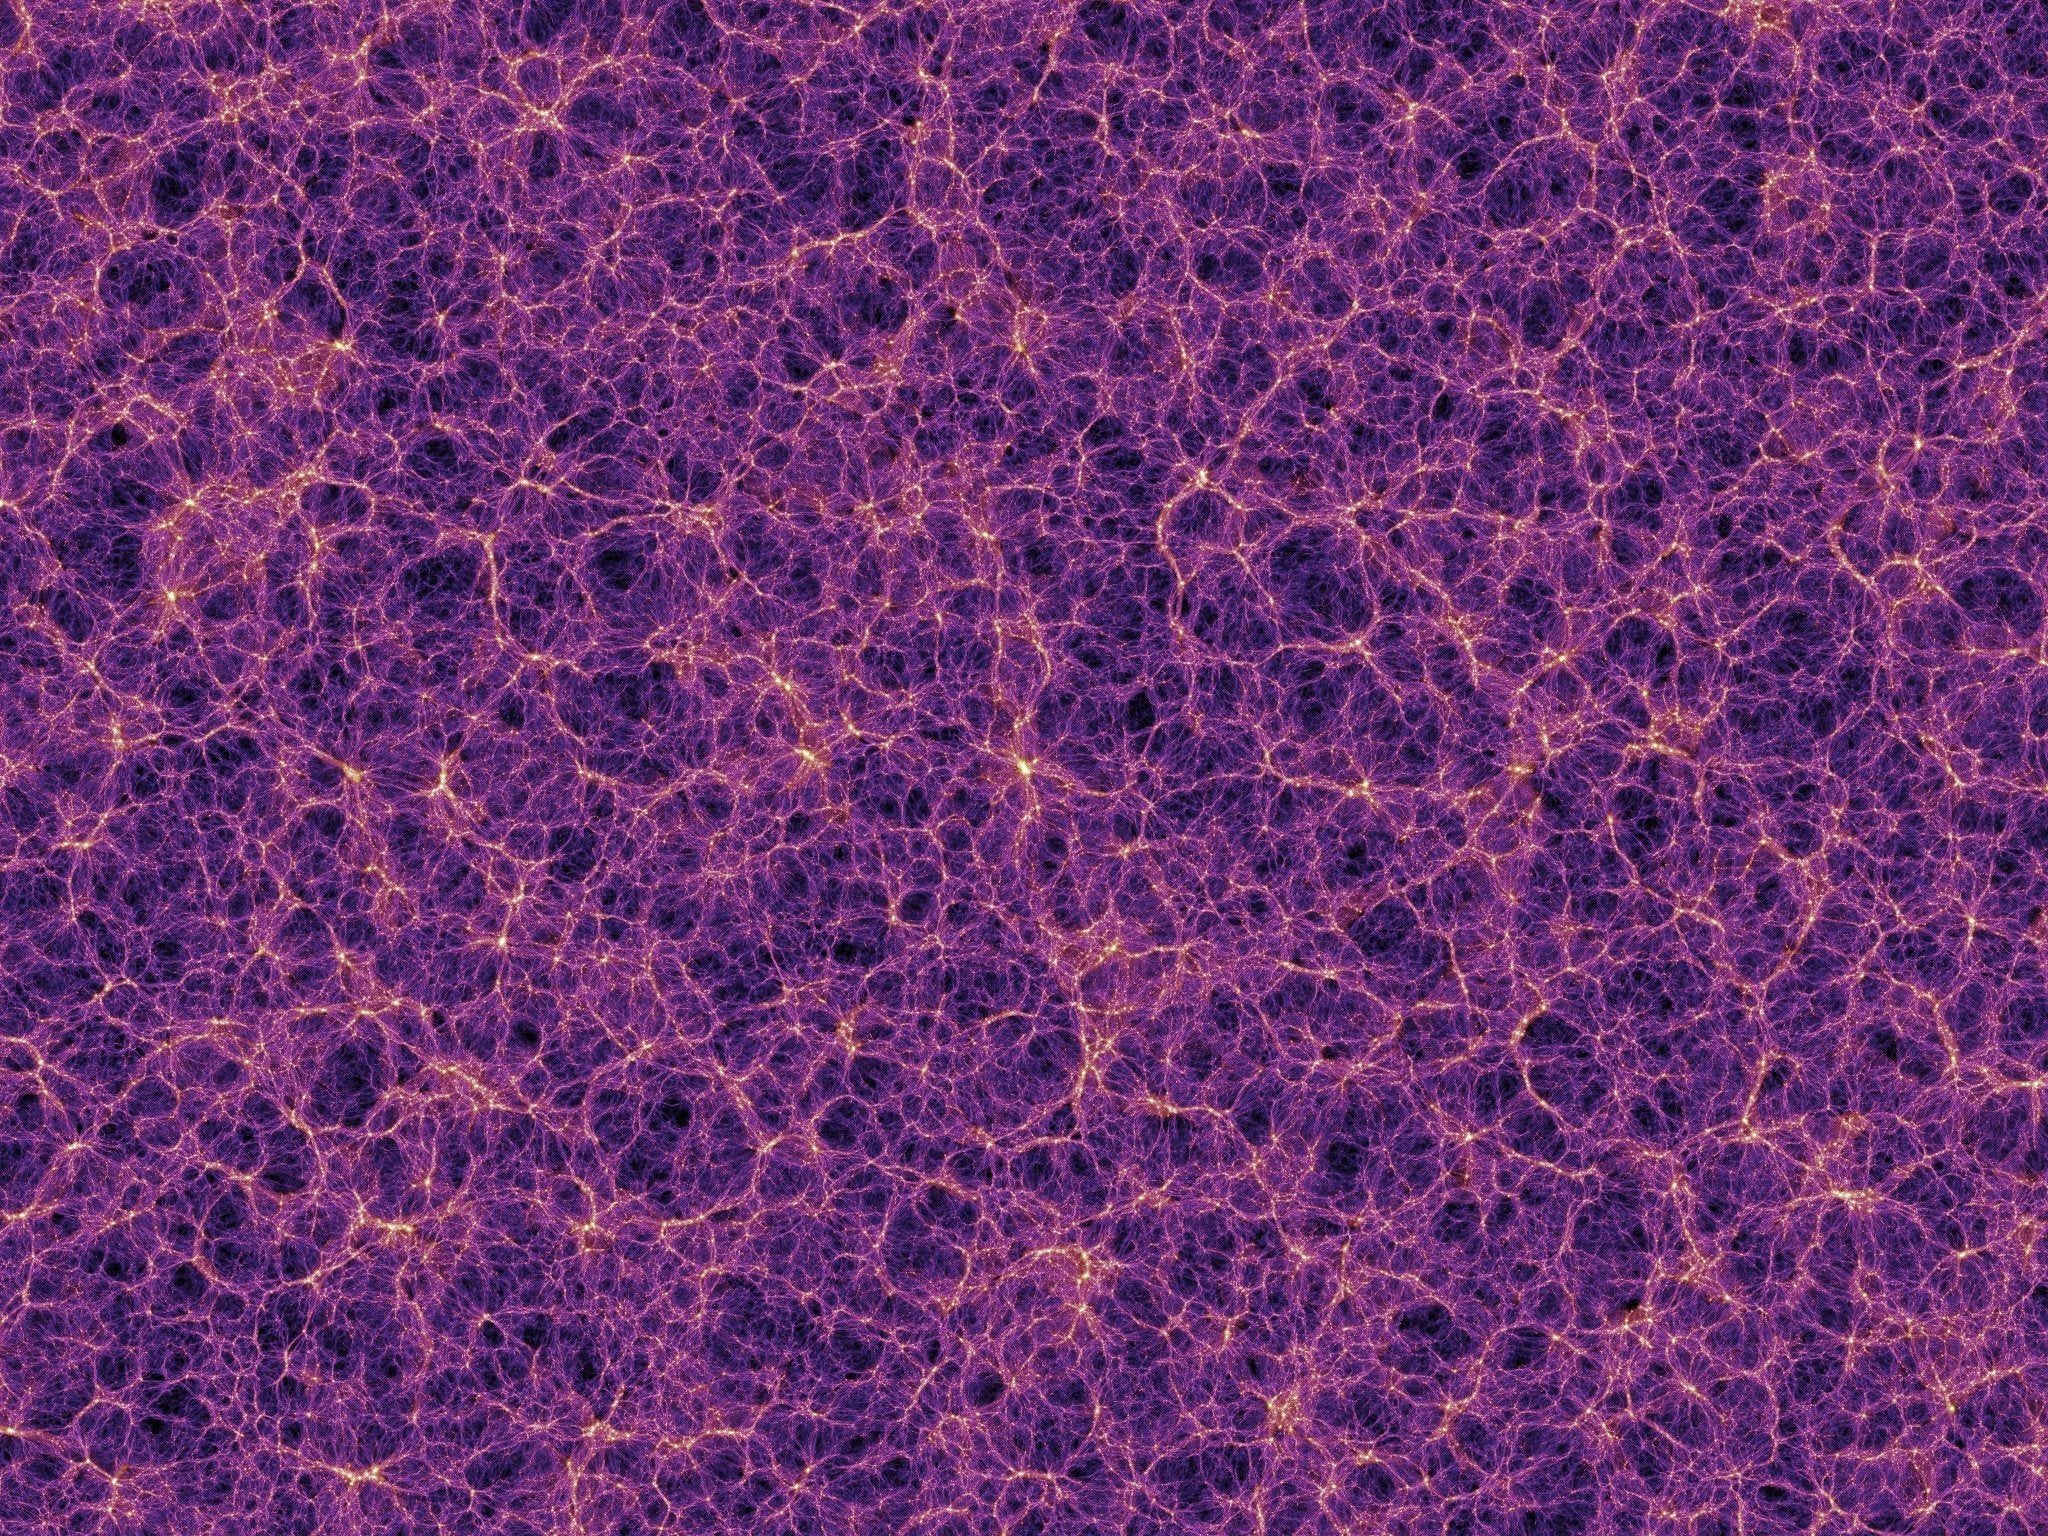 Observable Universe Wallpapers